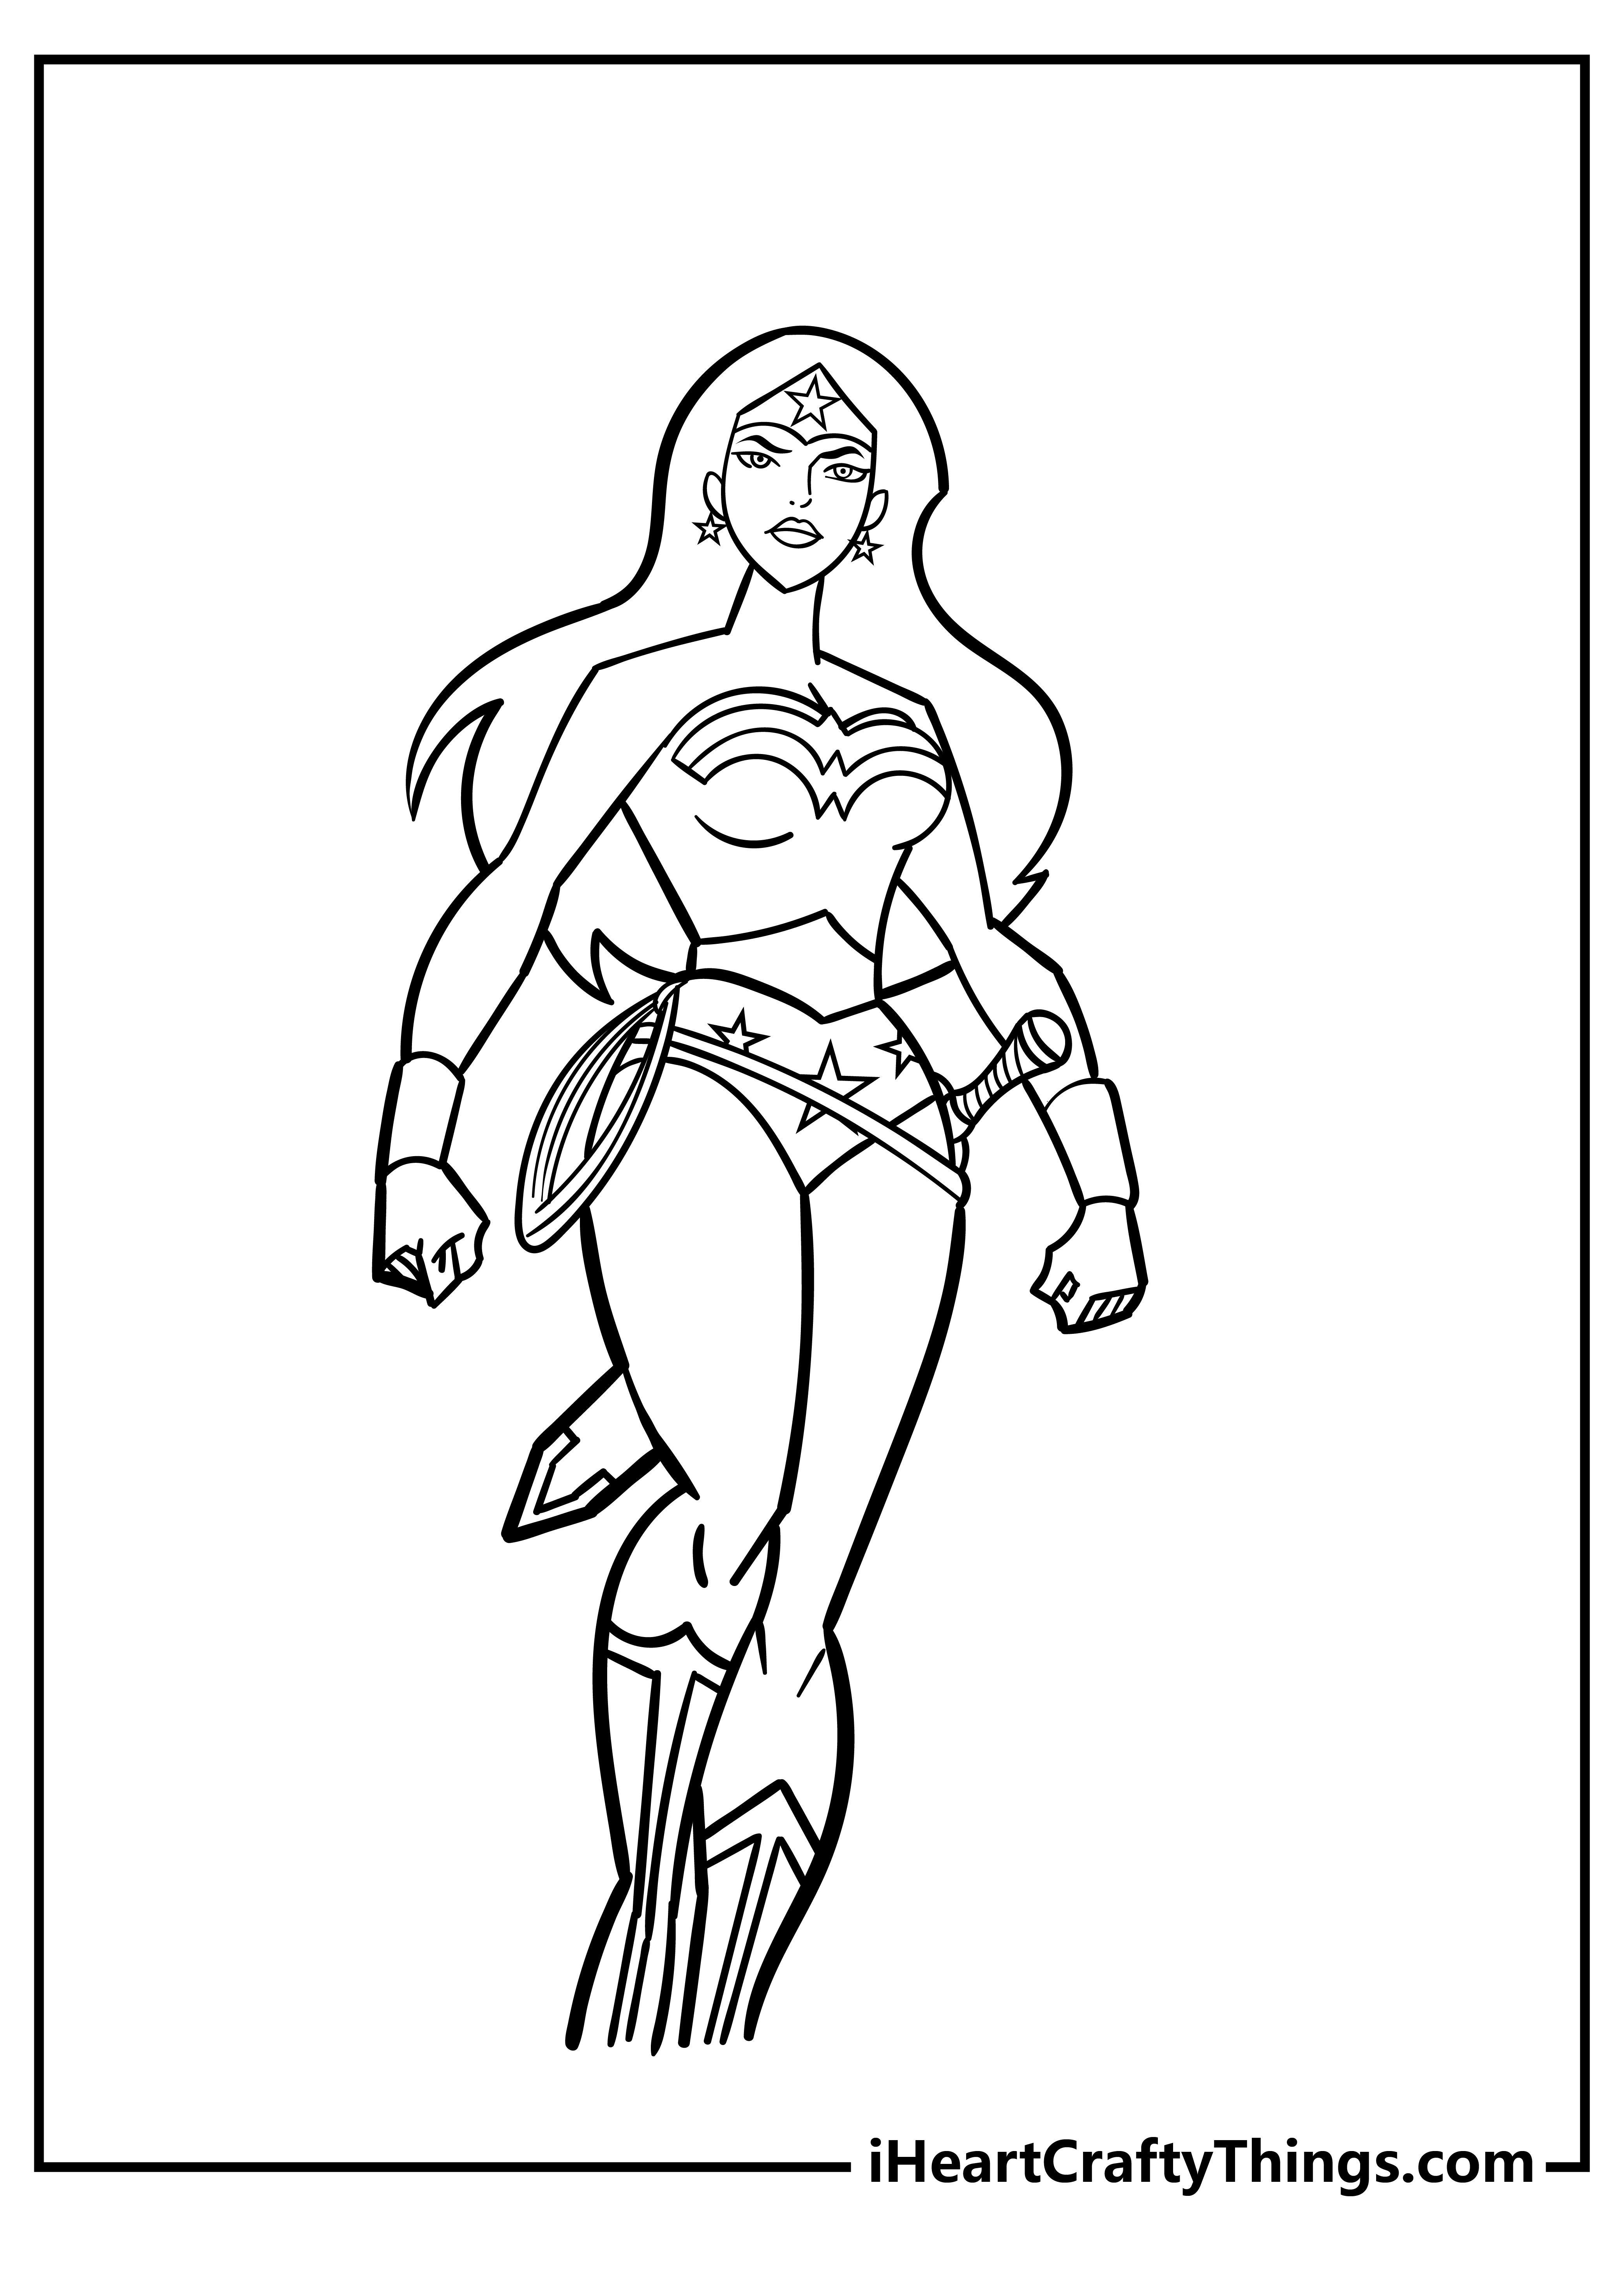 Wonder Woman Coloring Pages for kids free download